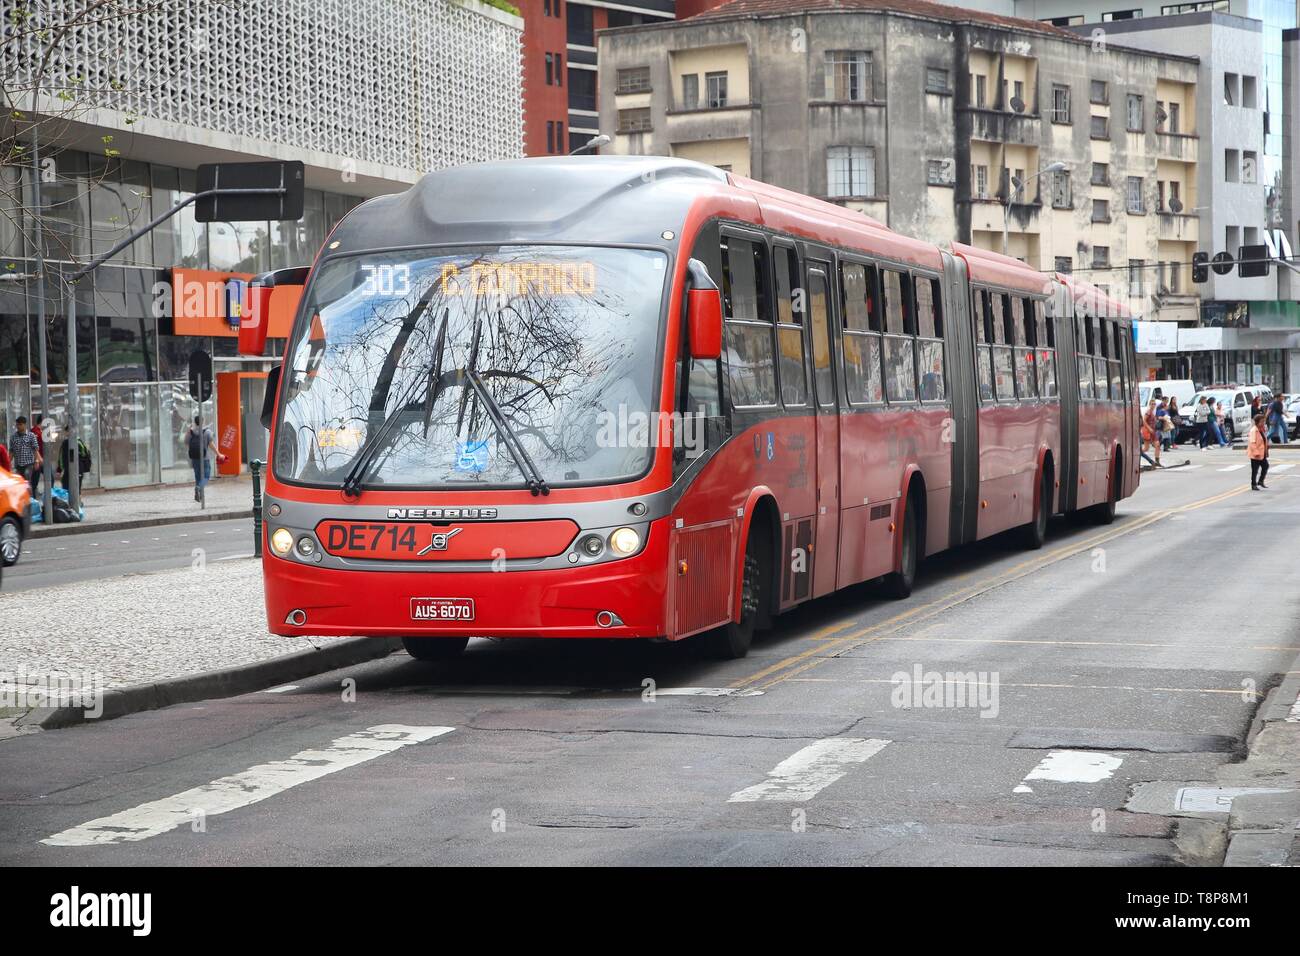 CURITIBA, BRAZIL - OCTOBER 7, 2014: People ride city bus in Curitiba, Brazil. Curitiba's bus system is world famous for its efficiency. Founded in 197 Stock Photo